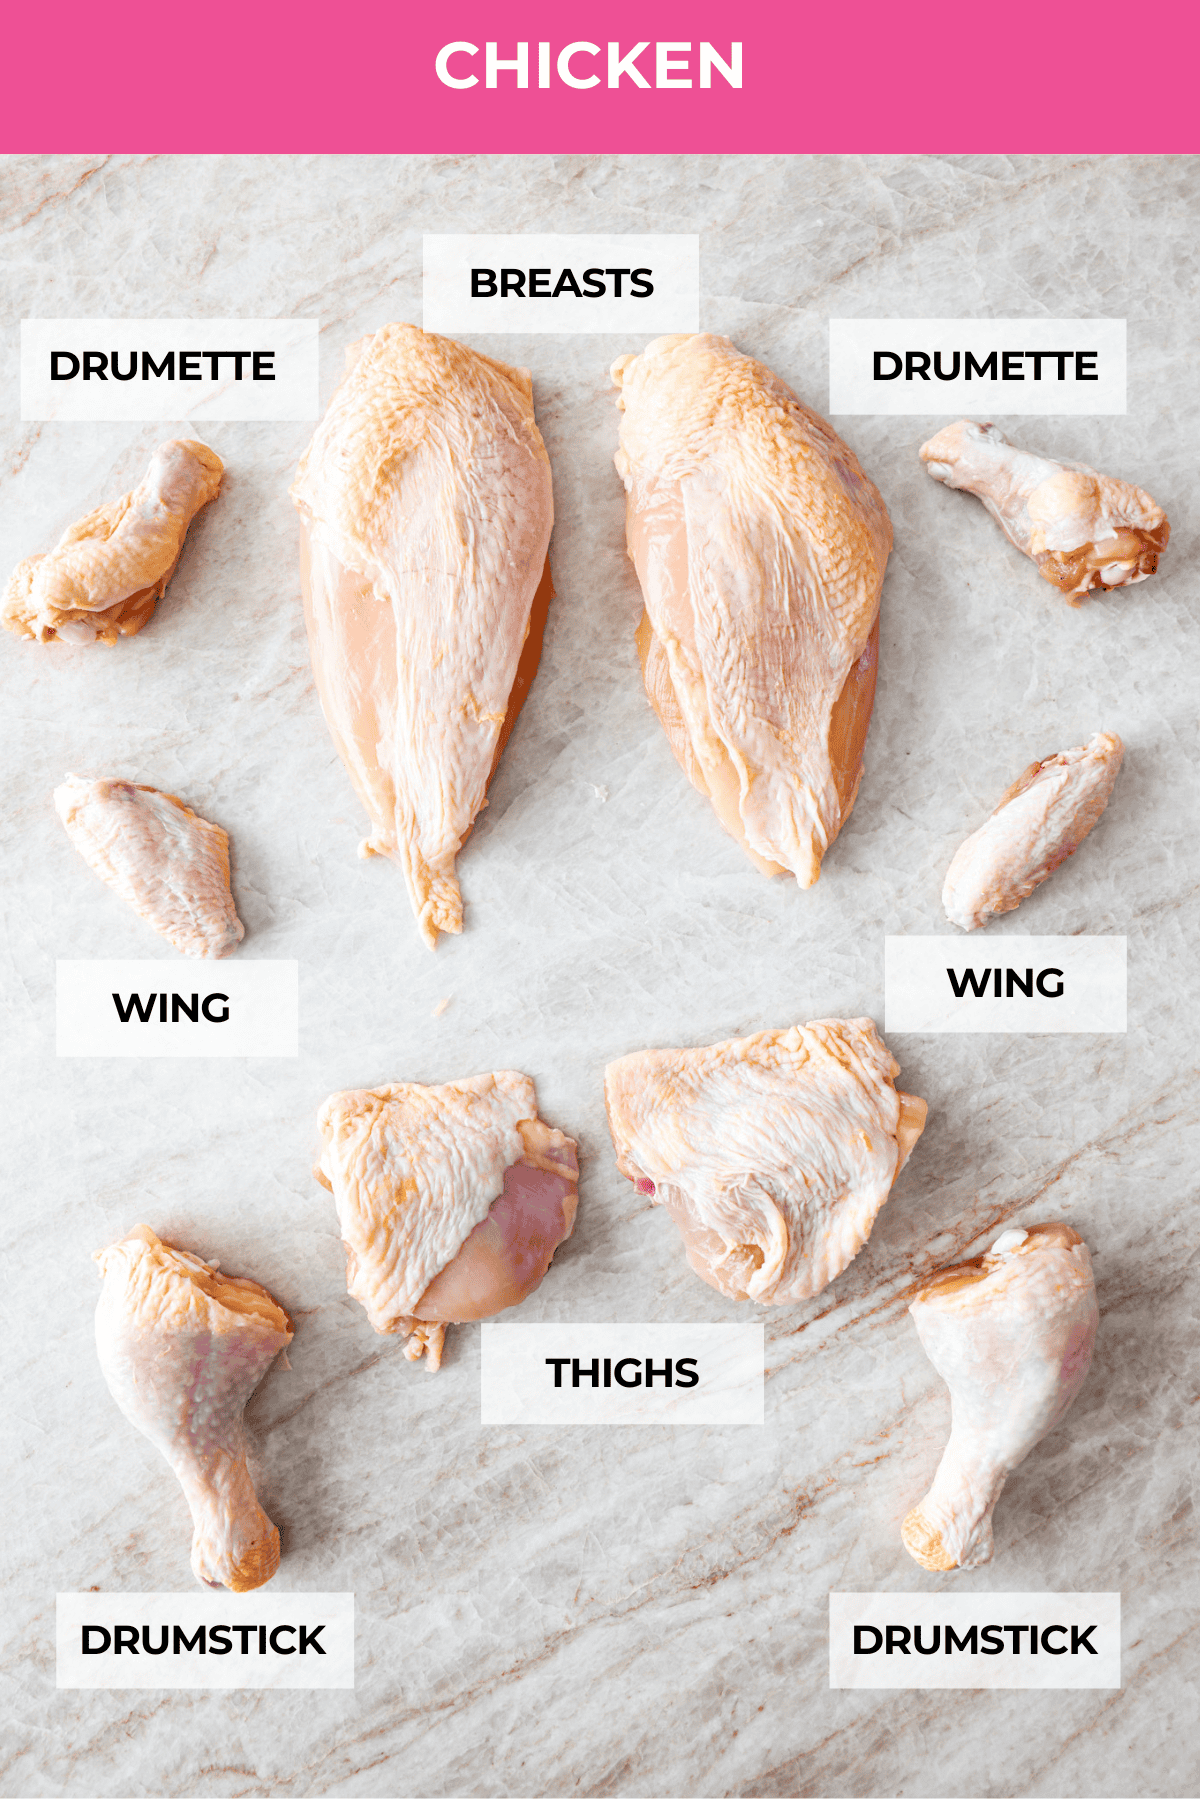 Cuts of chicken labeled.